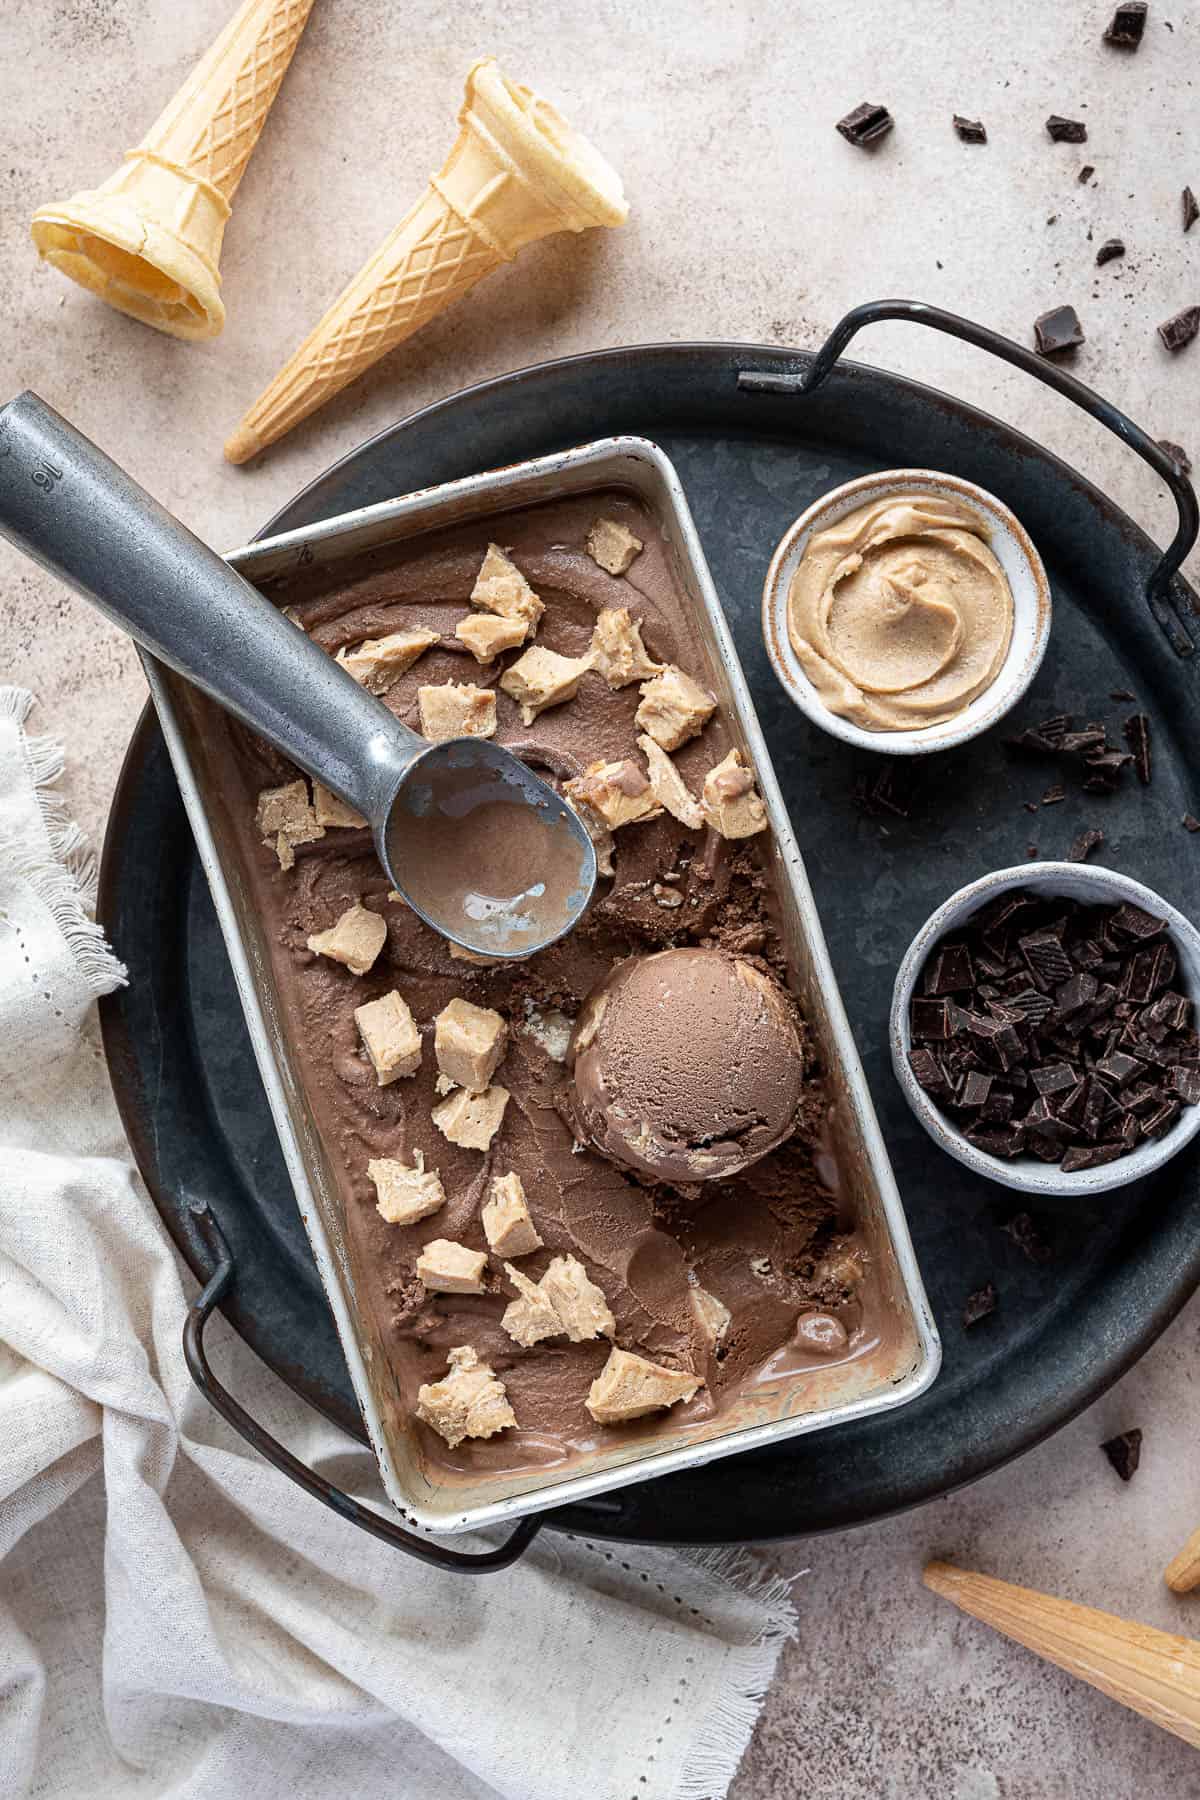 Chocolate peanut butter ice cream in a loaf tin on a metal tray.